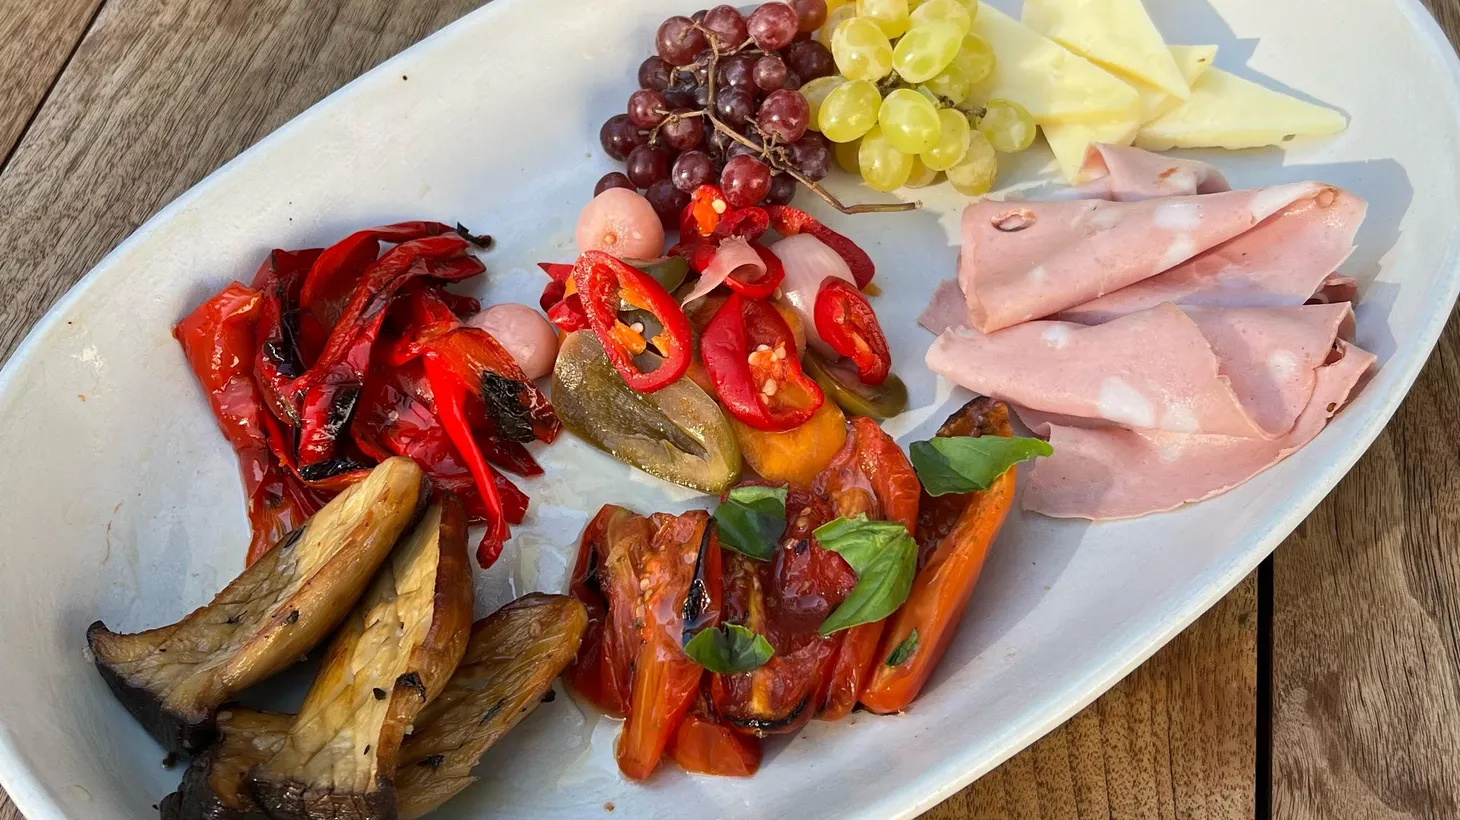 Deceivingly simple, Chris Bianco describes the composition of Pizzeria Bianco’s antipasti plate.